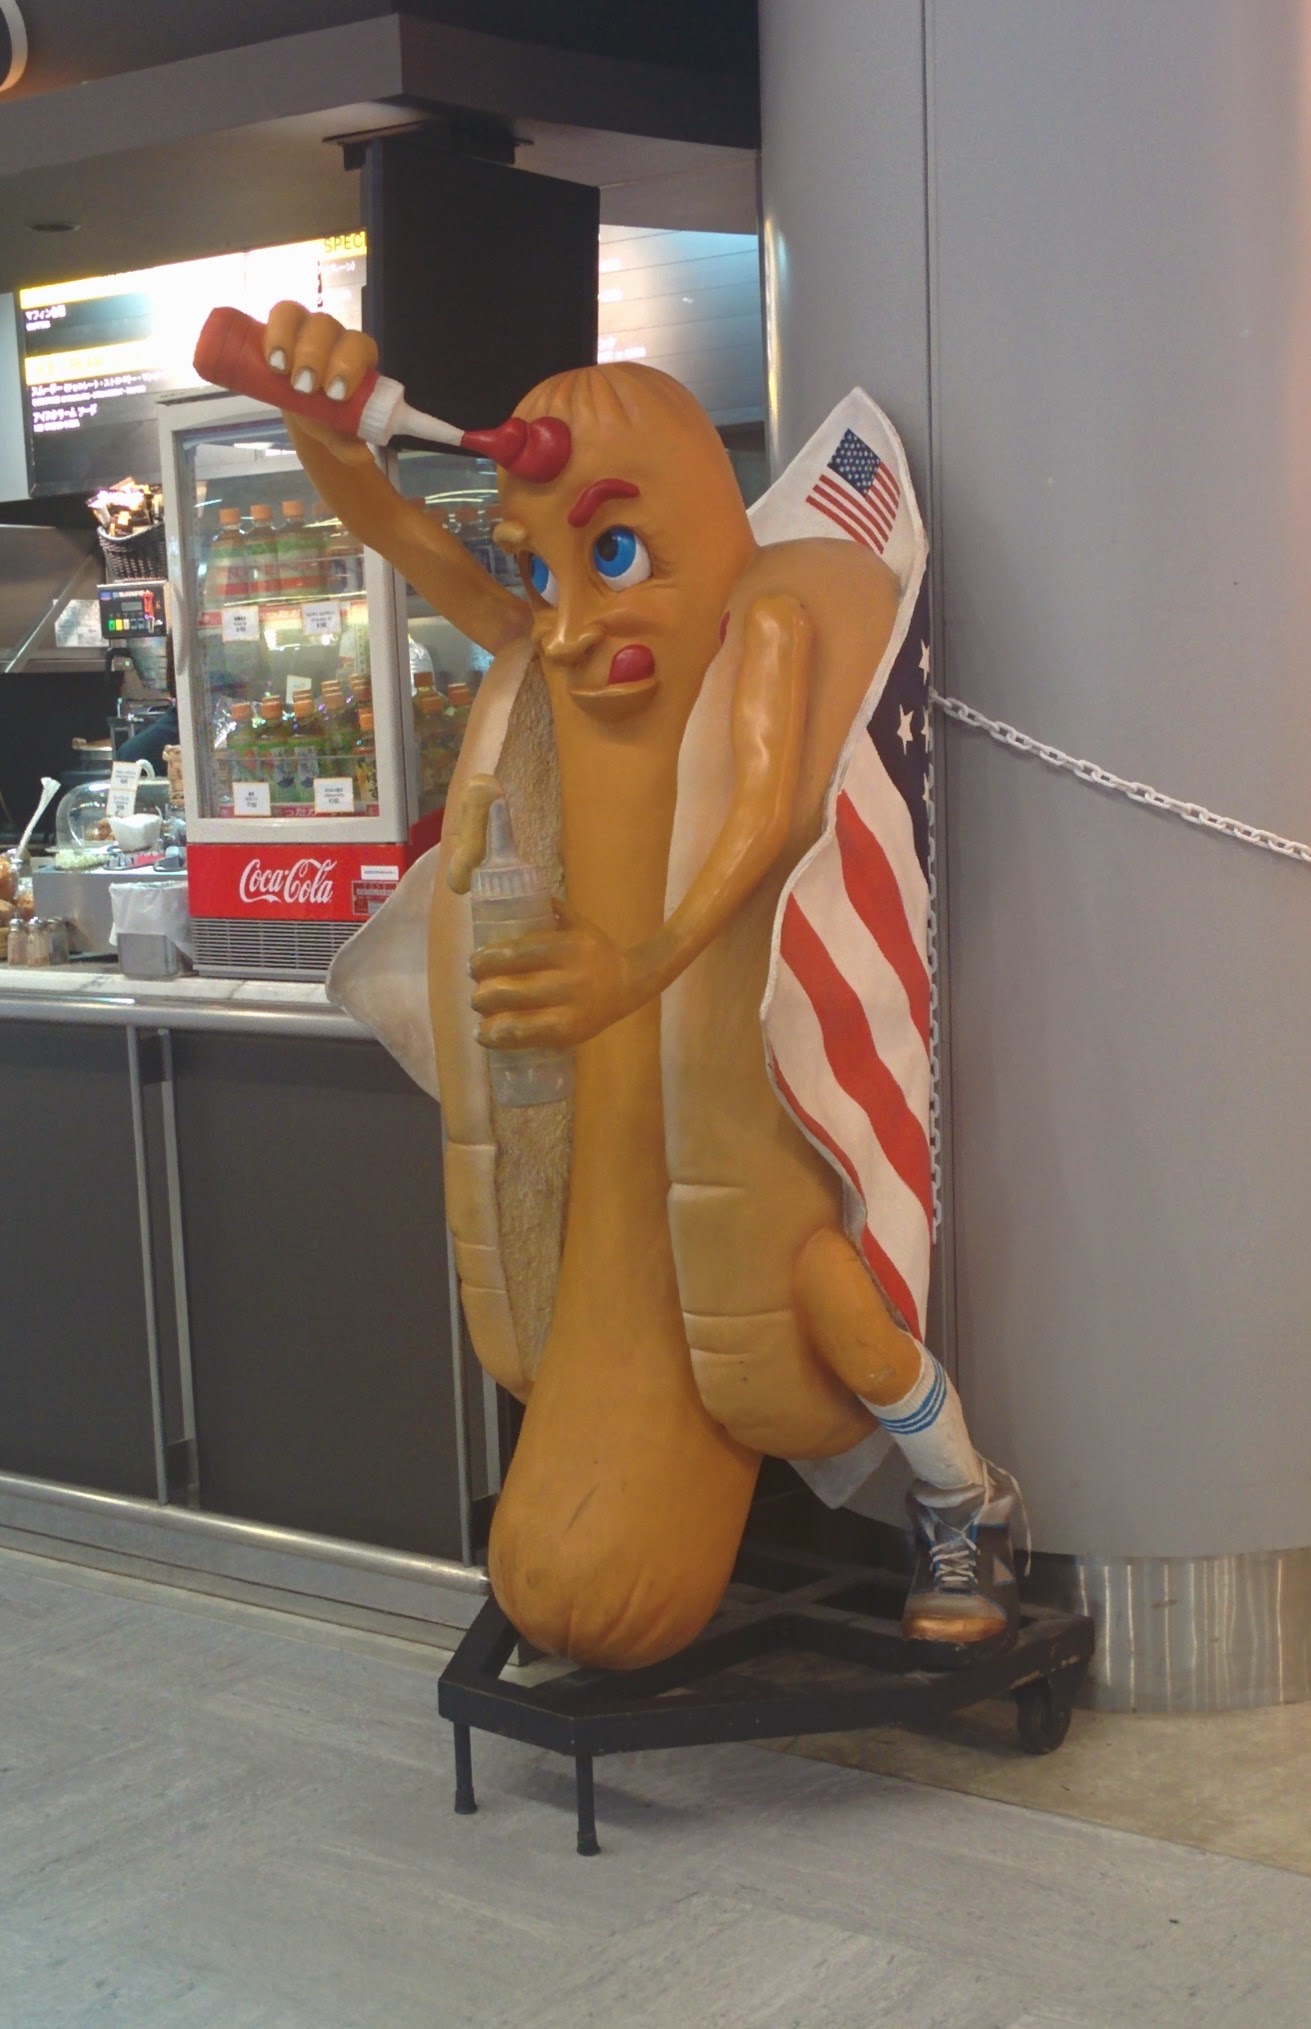 P.S. Saw this in the Tokyo airport. This is how Americans are seen apparently....